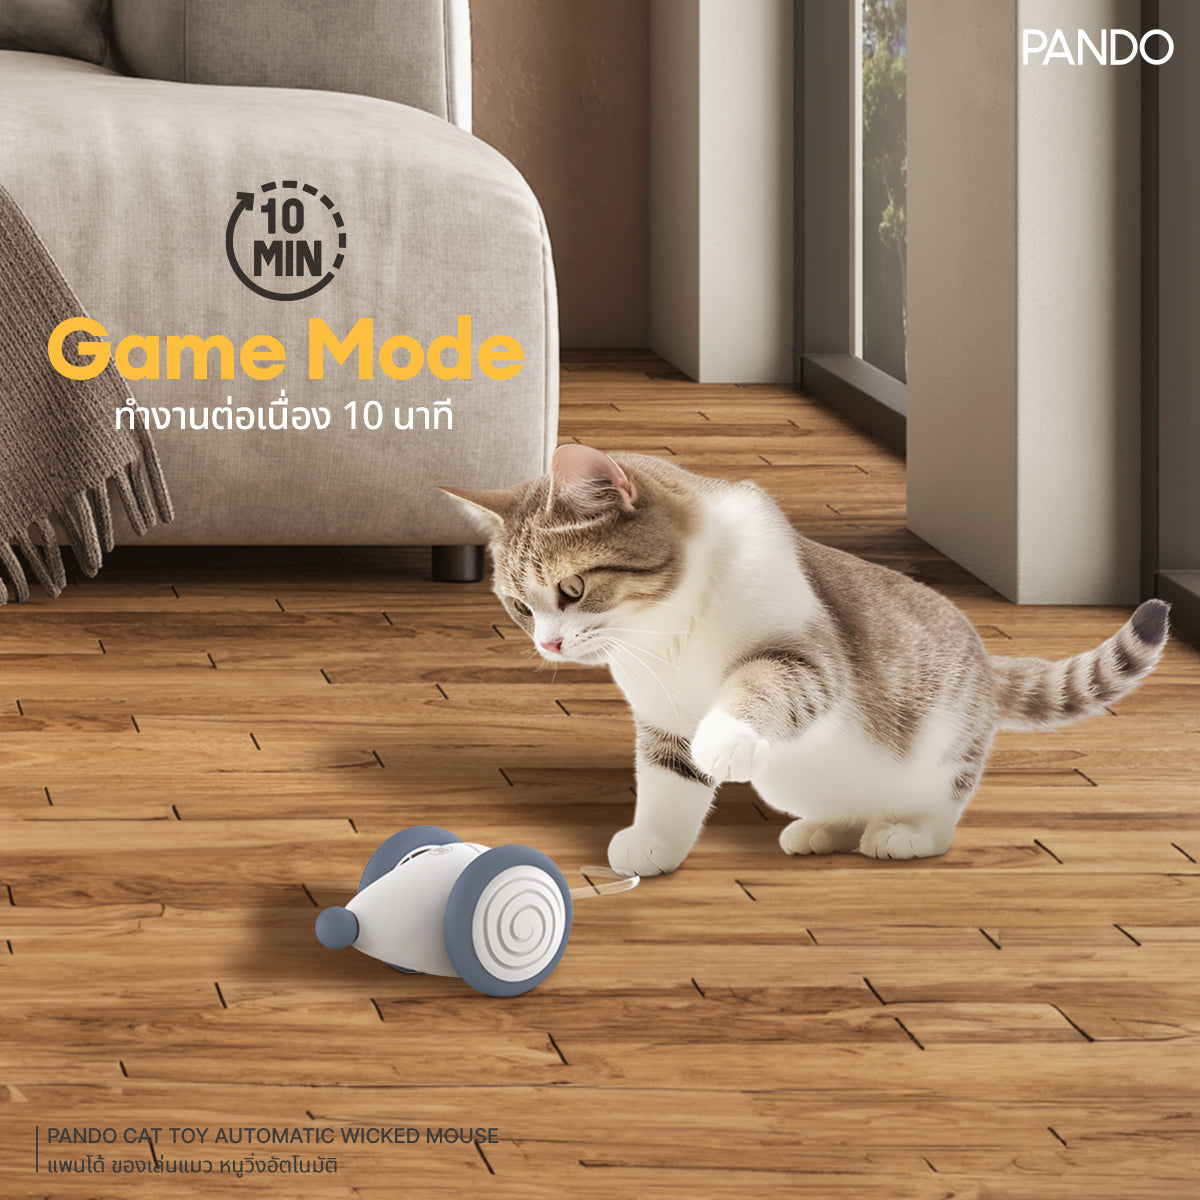 Pando Cat Toy Automatic Wicked Mouse